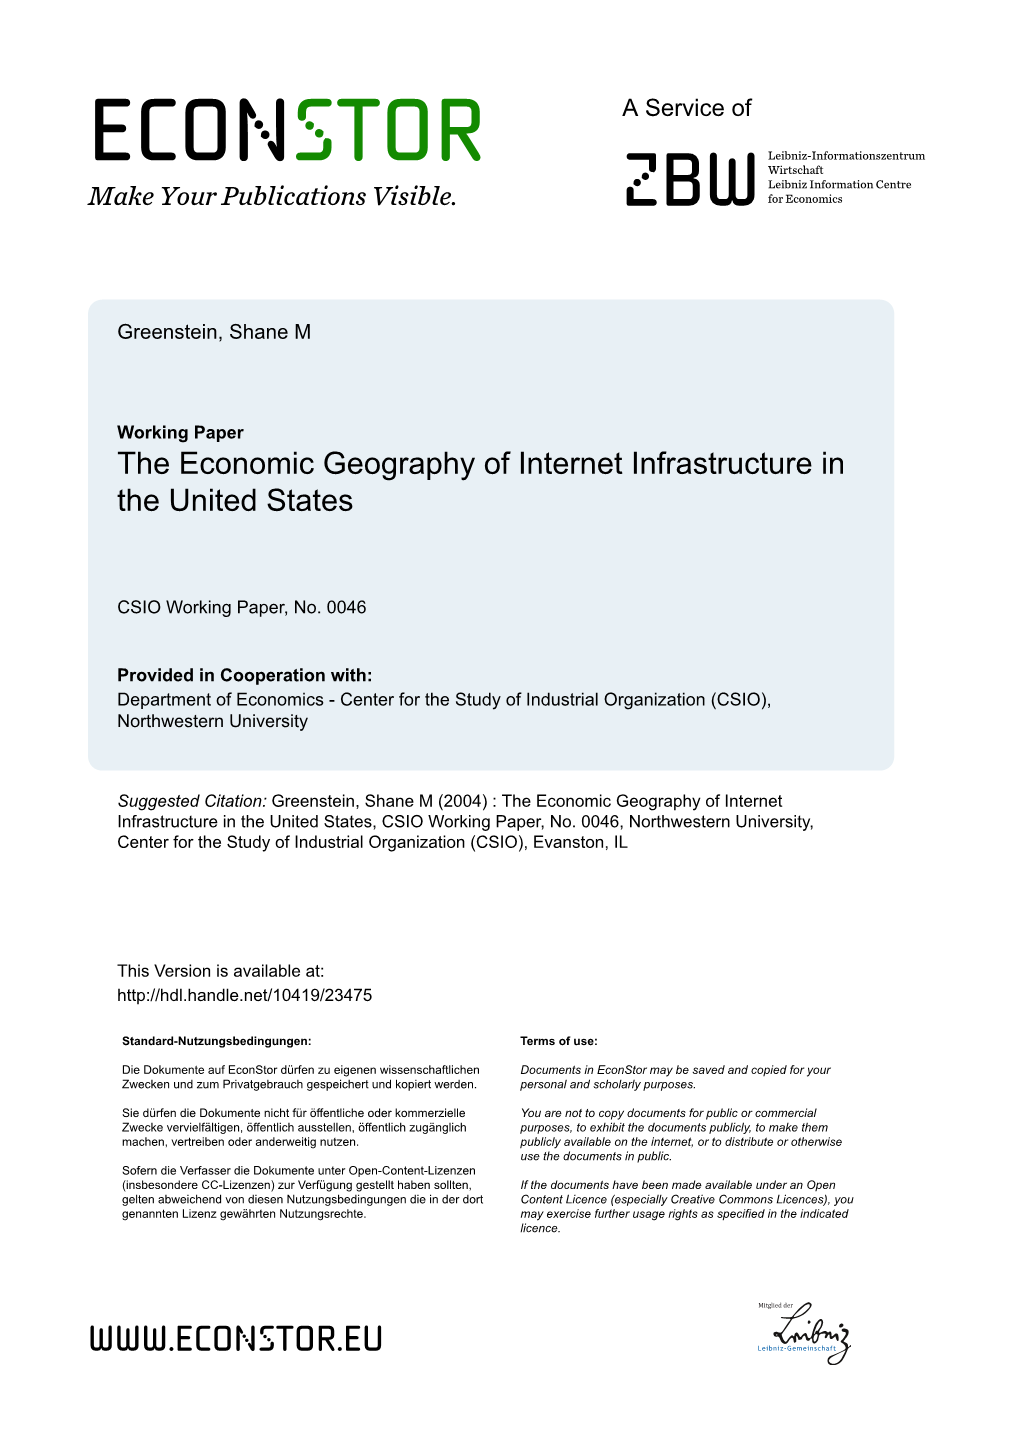 The Economic Geography of Internet Infrastructure in the United States